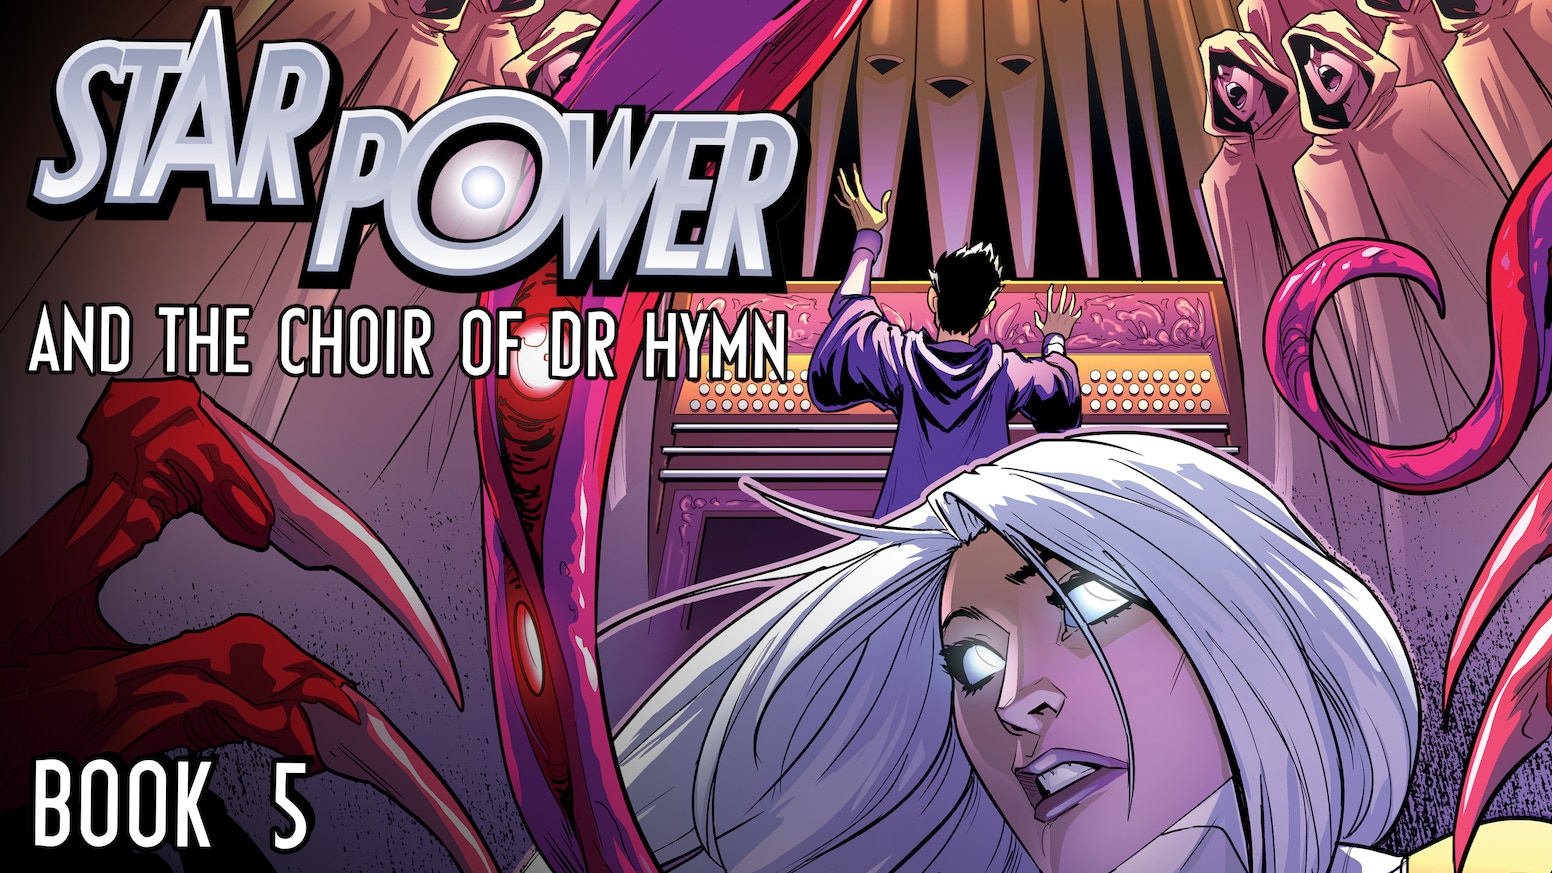 Star power and the choir of doctor hymn by garth graham â